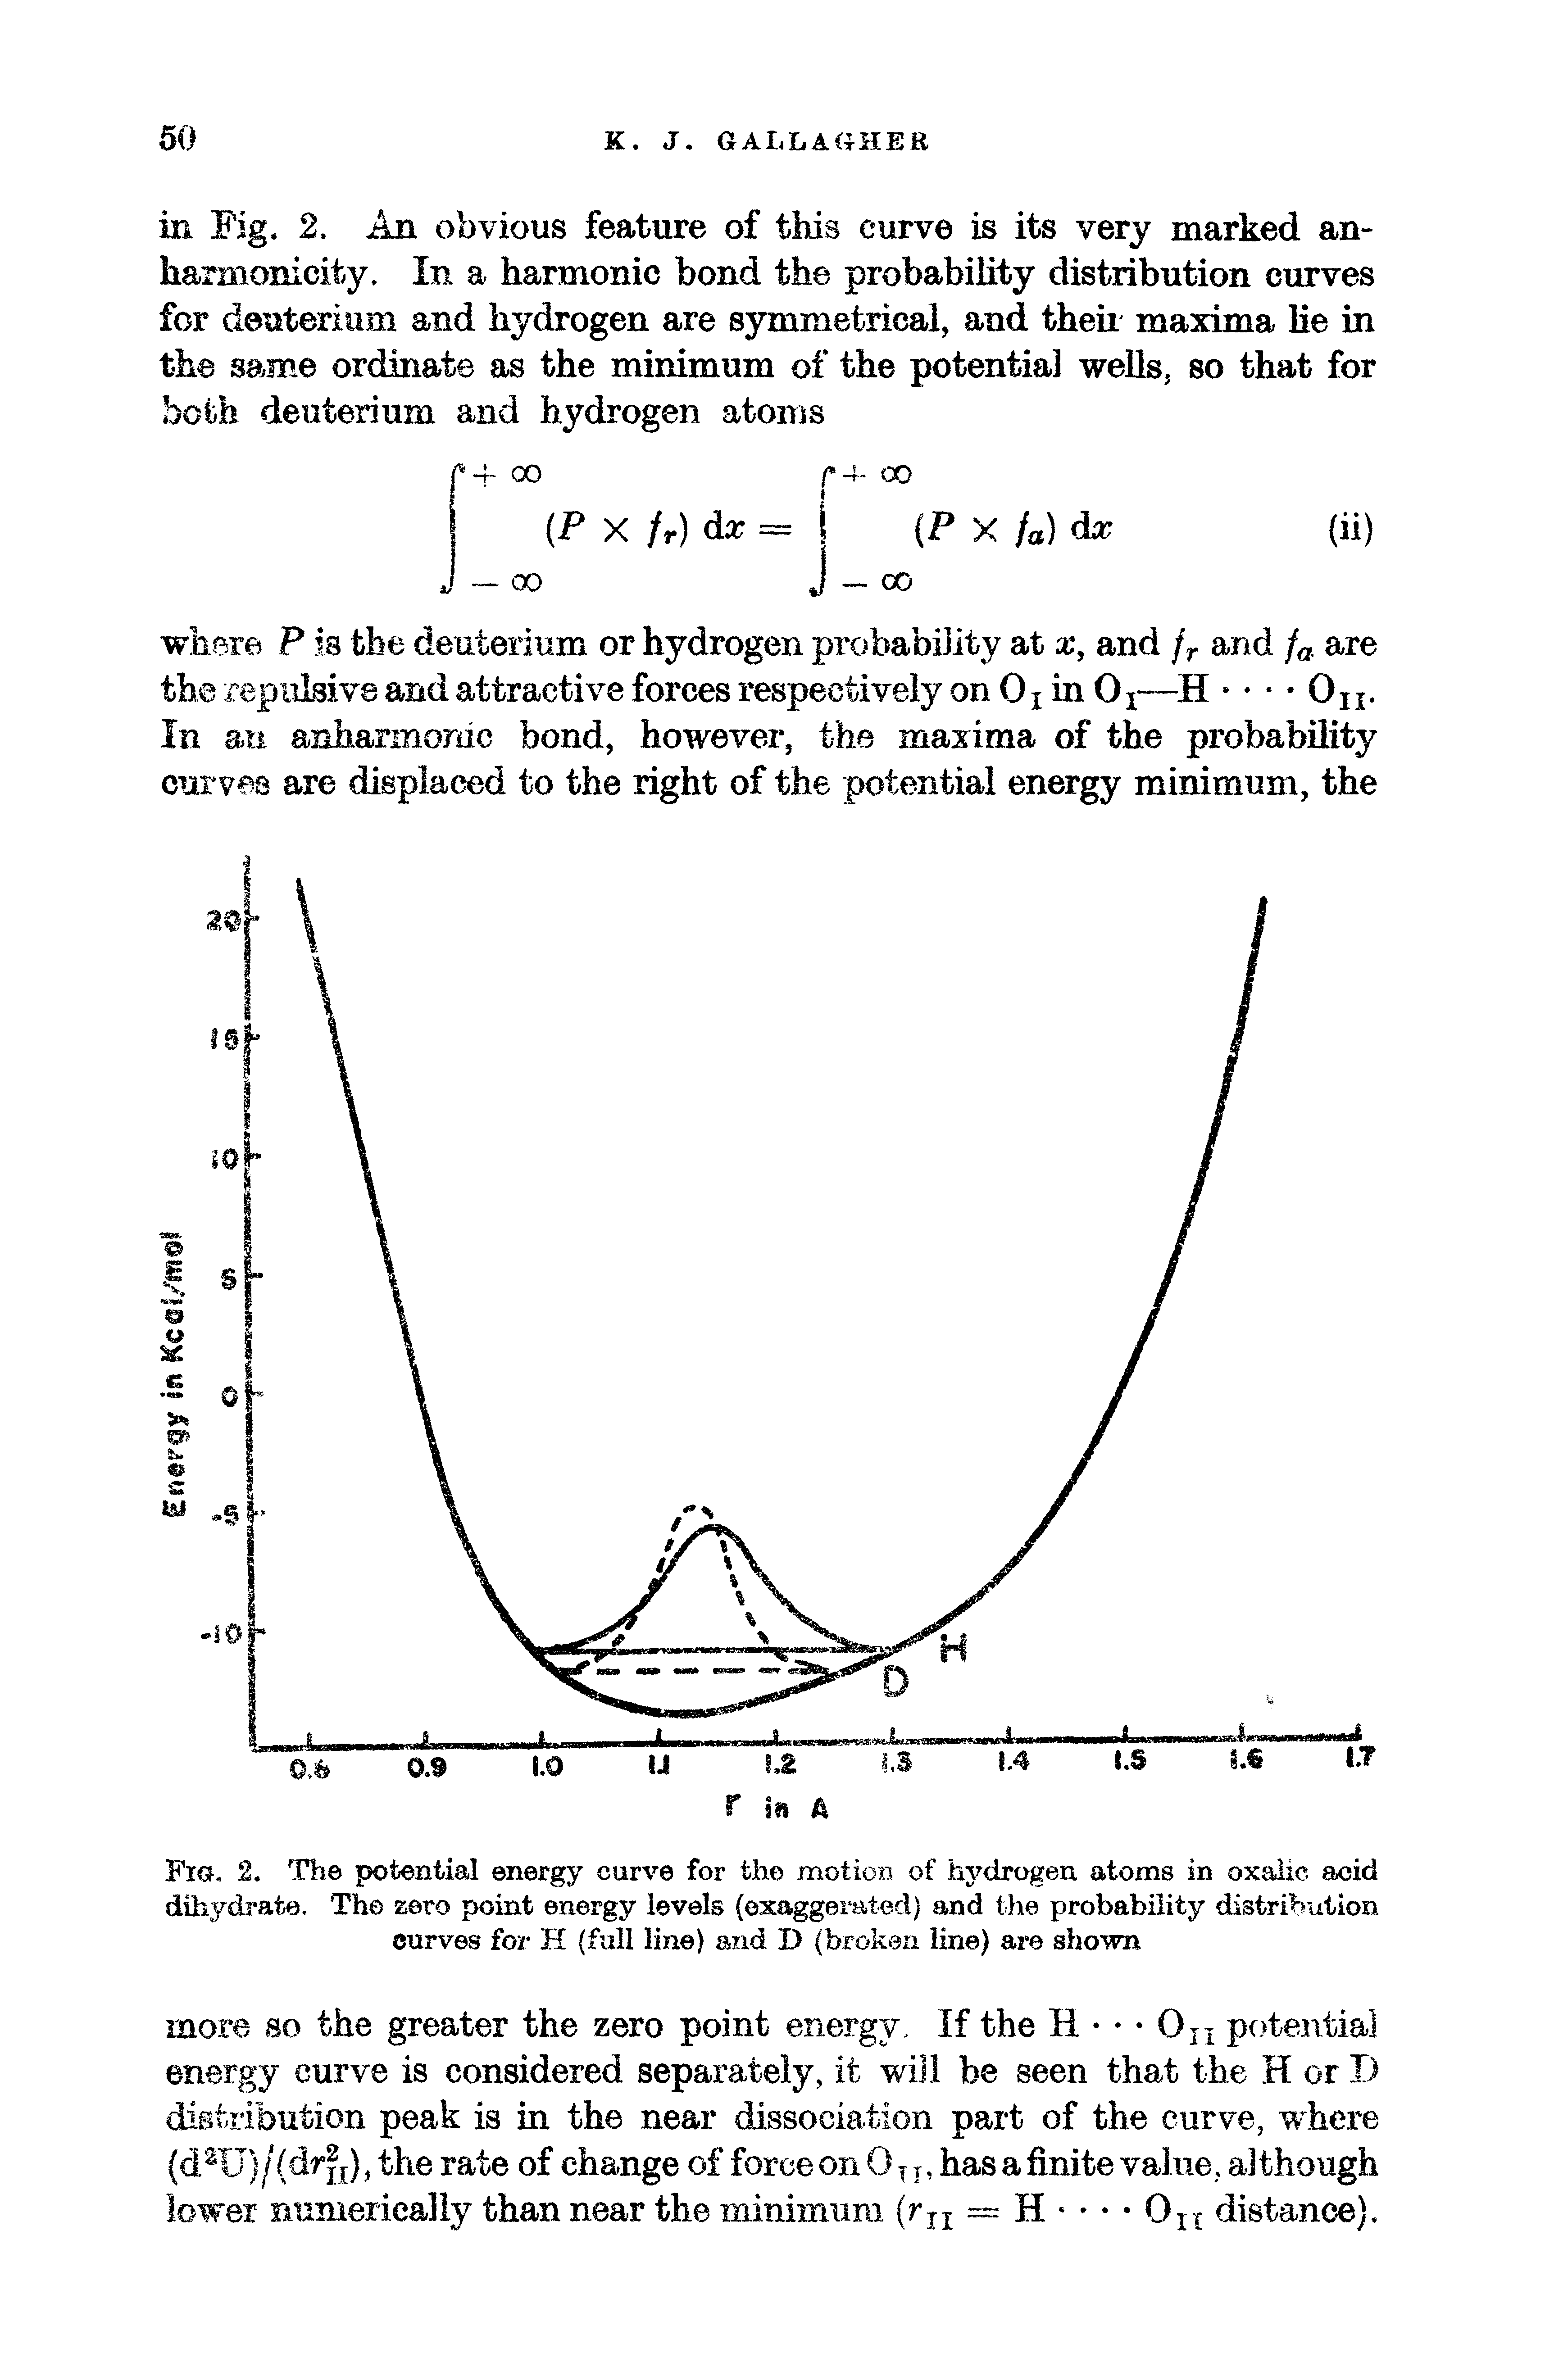 Fig. 2. The potential energy curve for the motion of hydrogen atoms in oxalic acid dihydrate. The zero point energy levels (exaggerated) and the probability distribution curves for H (full line) and D (broken line) are shown...